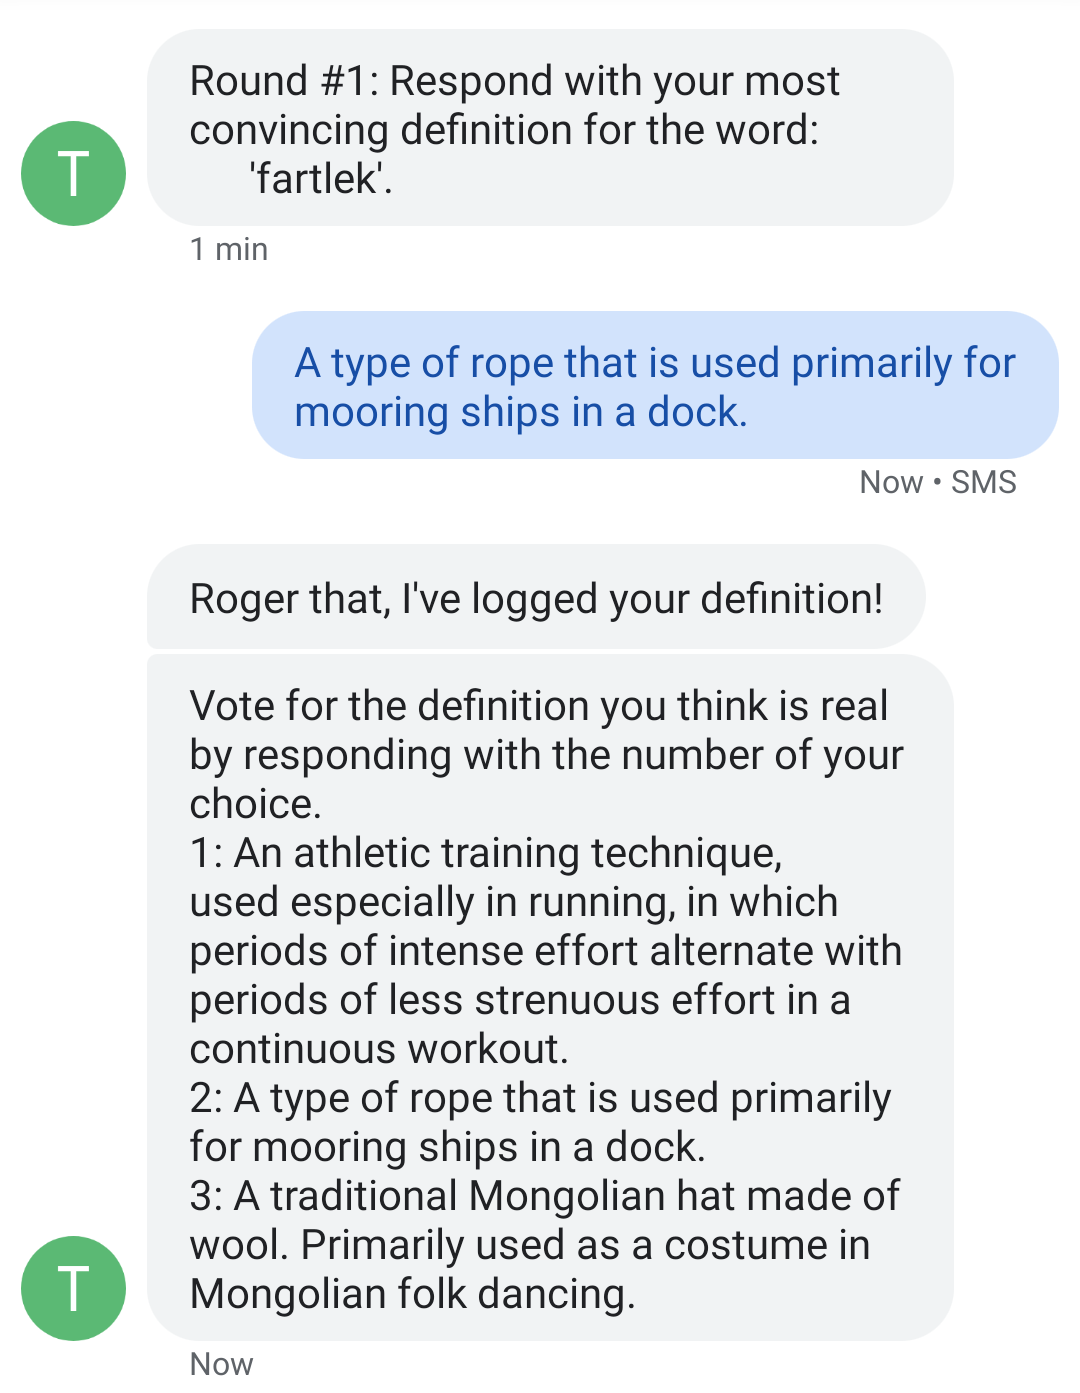 Example text exchange with BalderText game bot for the defining and voting sections of the round.